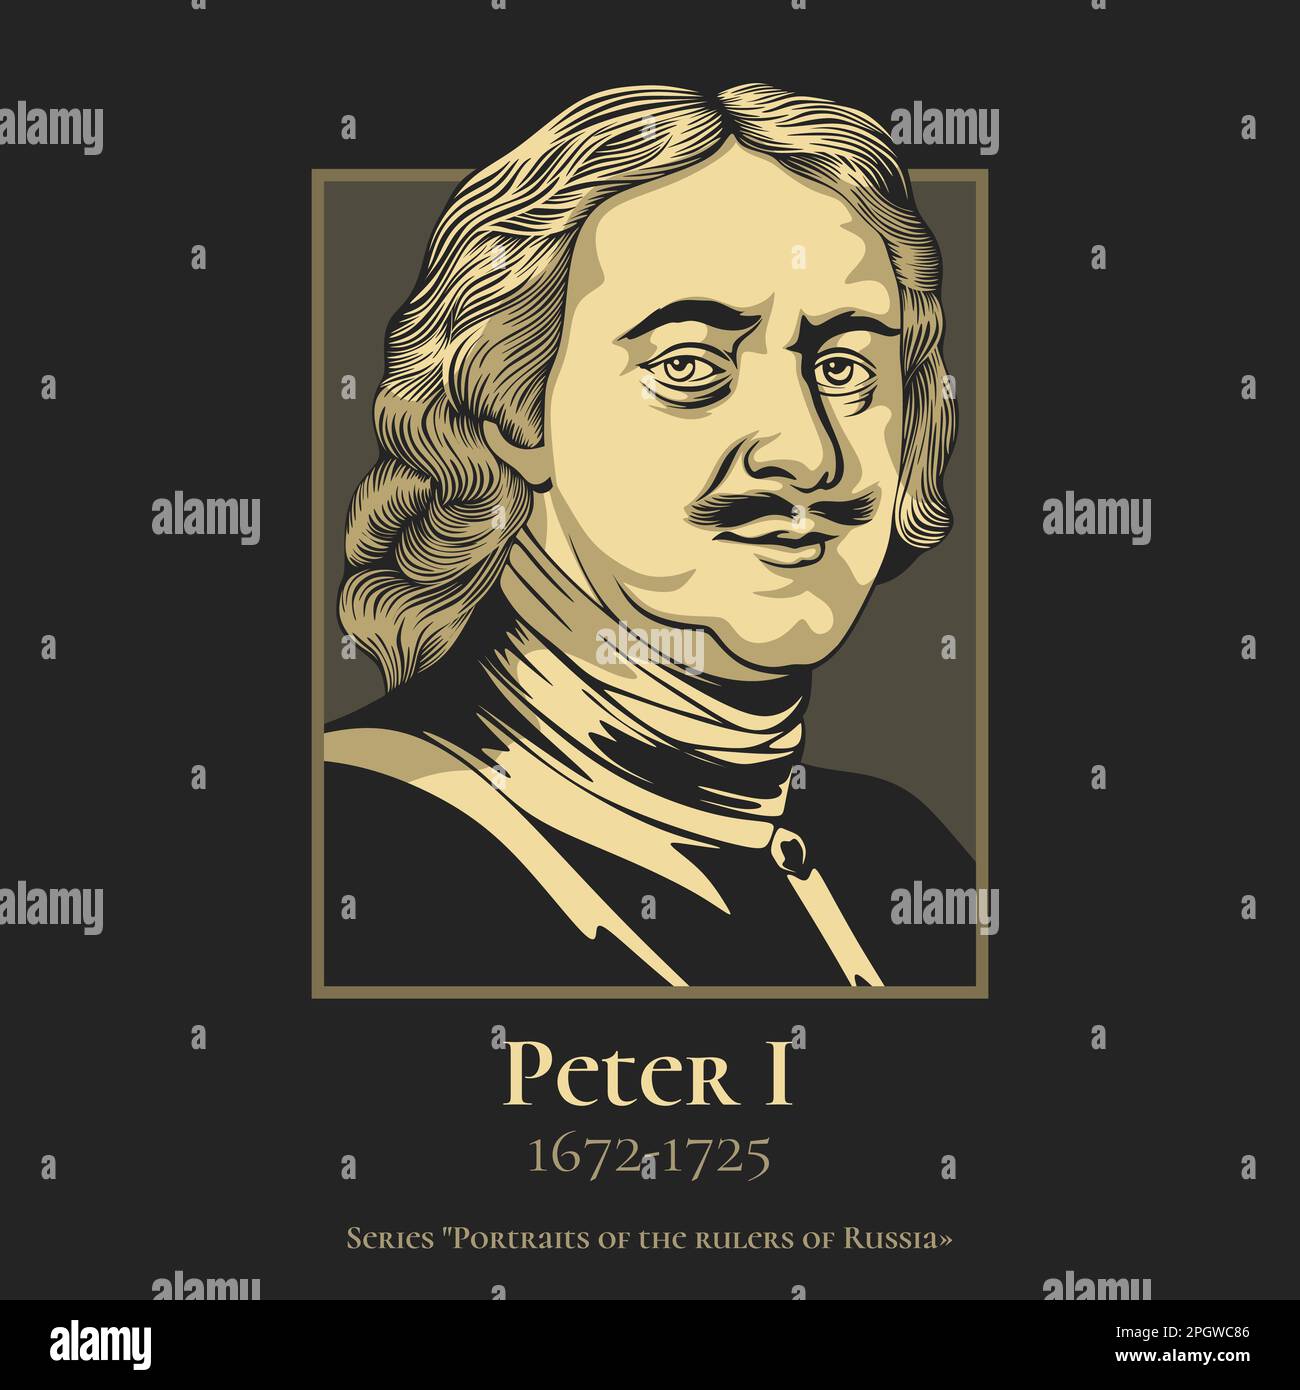 Peter I (1672-1725) most commonly known as Peter the Great, was a Russian monarch who ruled the Tsardom of Russia from 7 May 1682 to 1721. Stock Vector